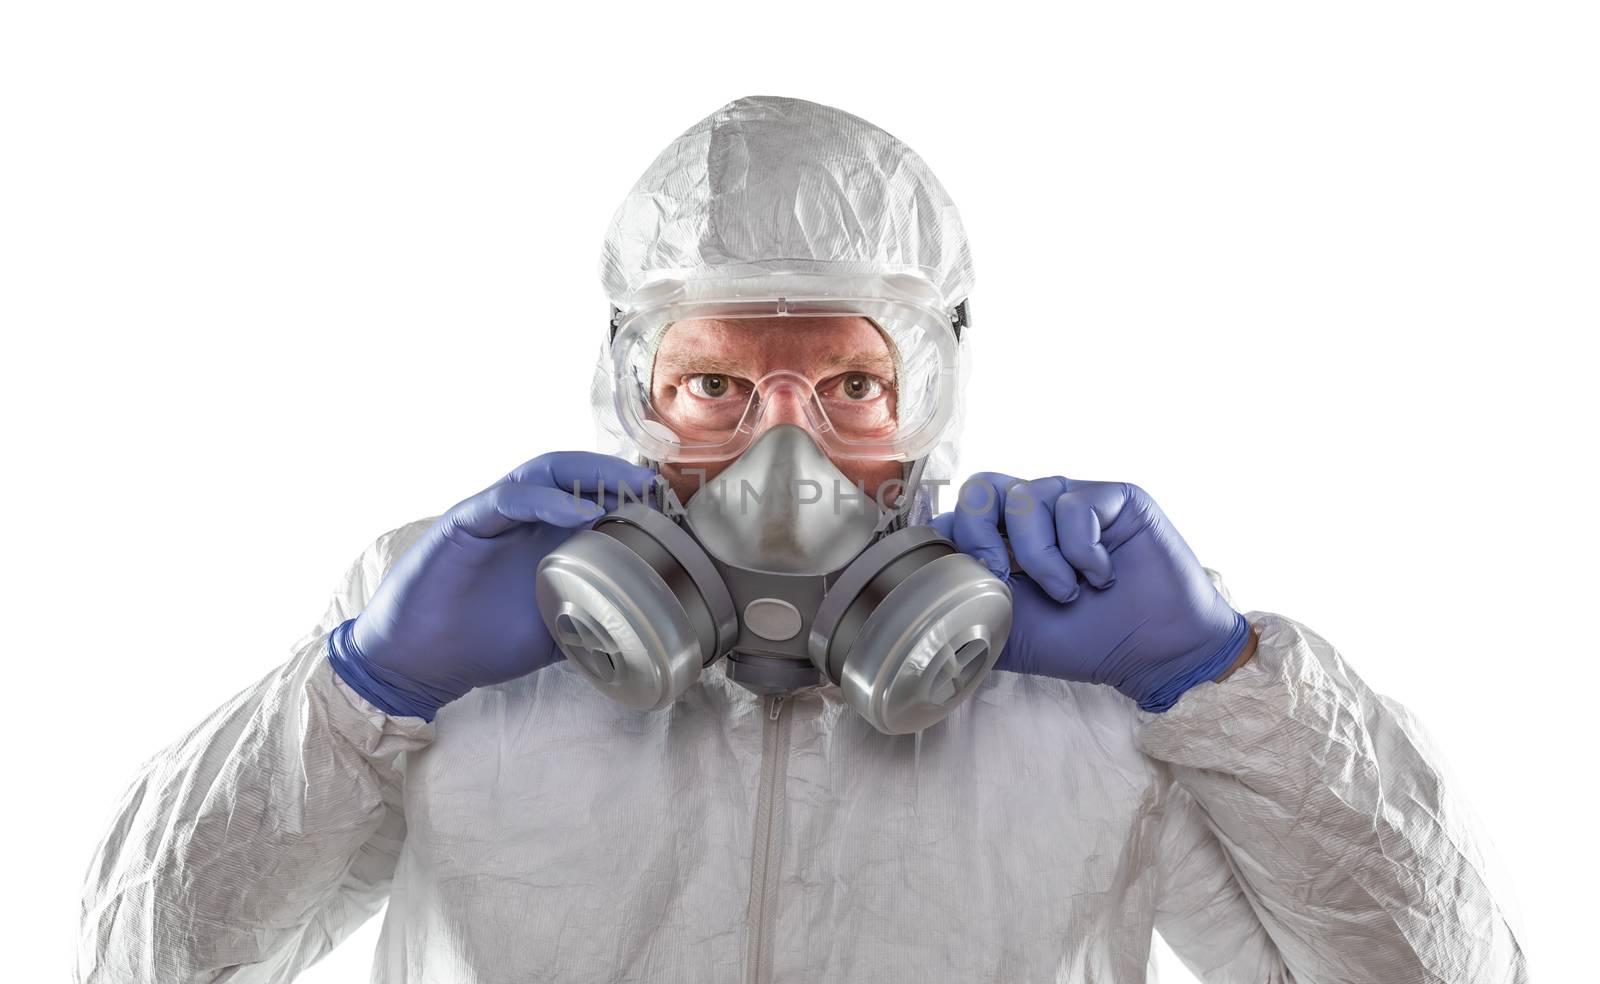 Man Wearing Hazmat Suit, Goggles and Gas Mask Isolated On White by Feverpitched